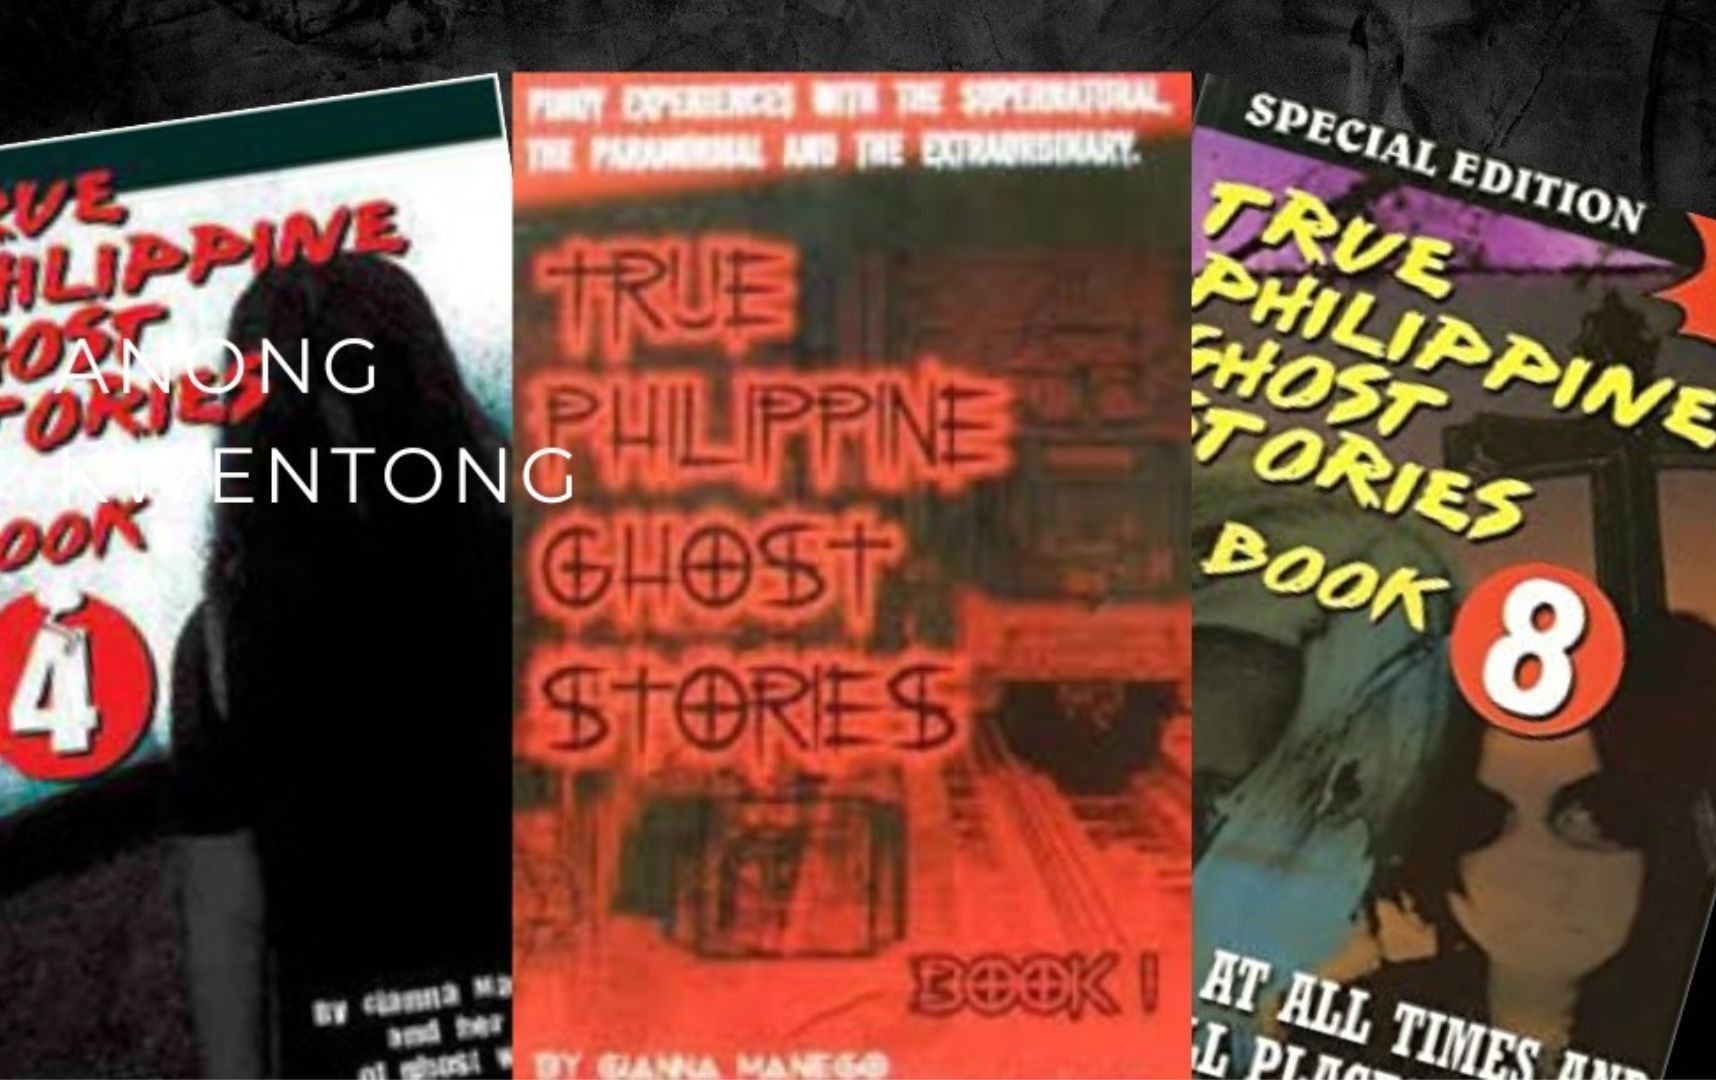 'True Philippine Ghost Stories' marking comeback, accepting submissions